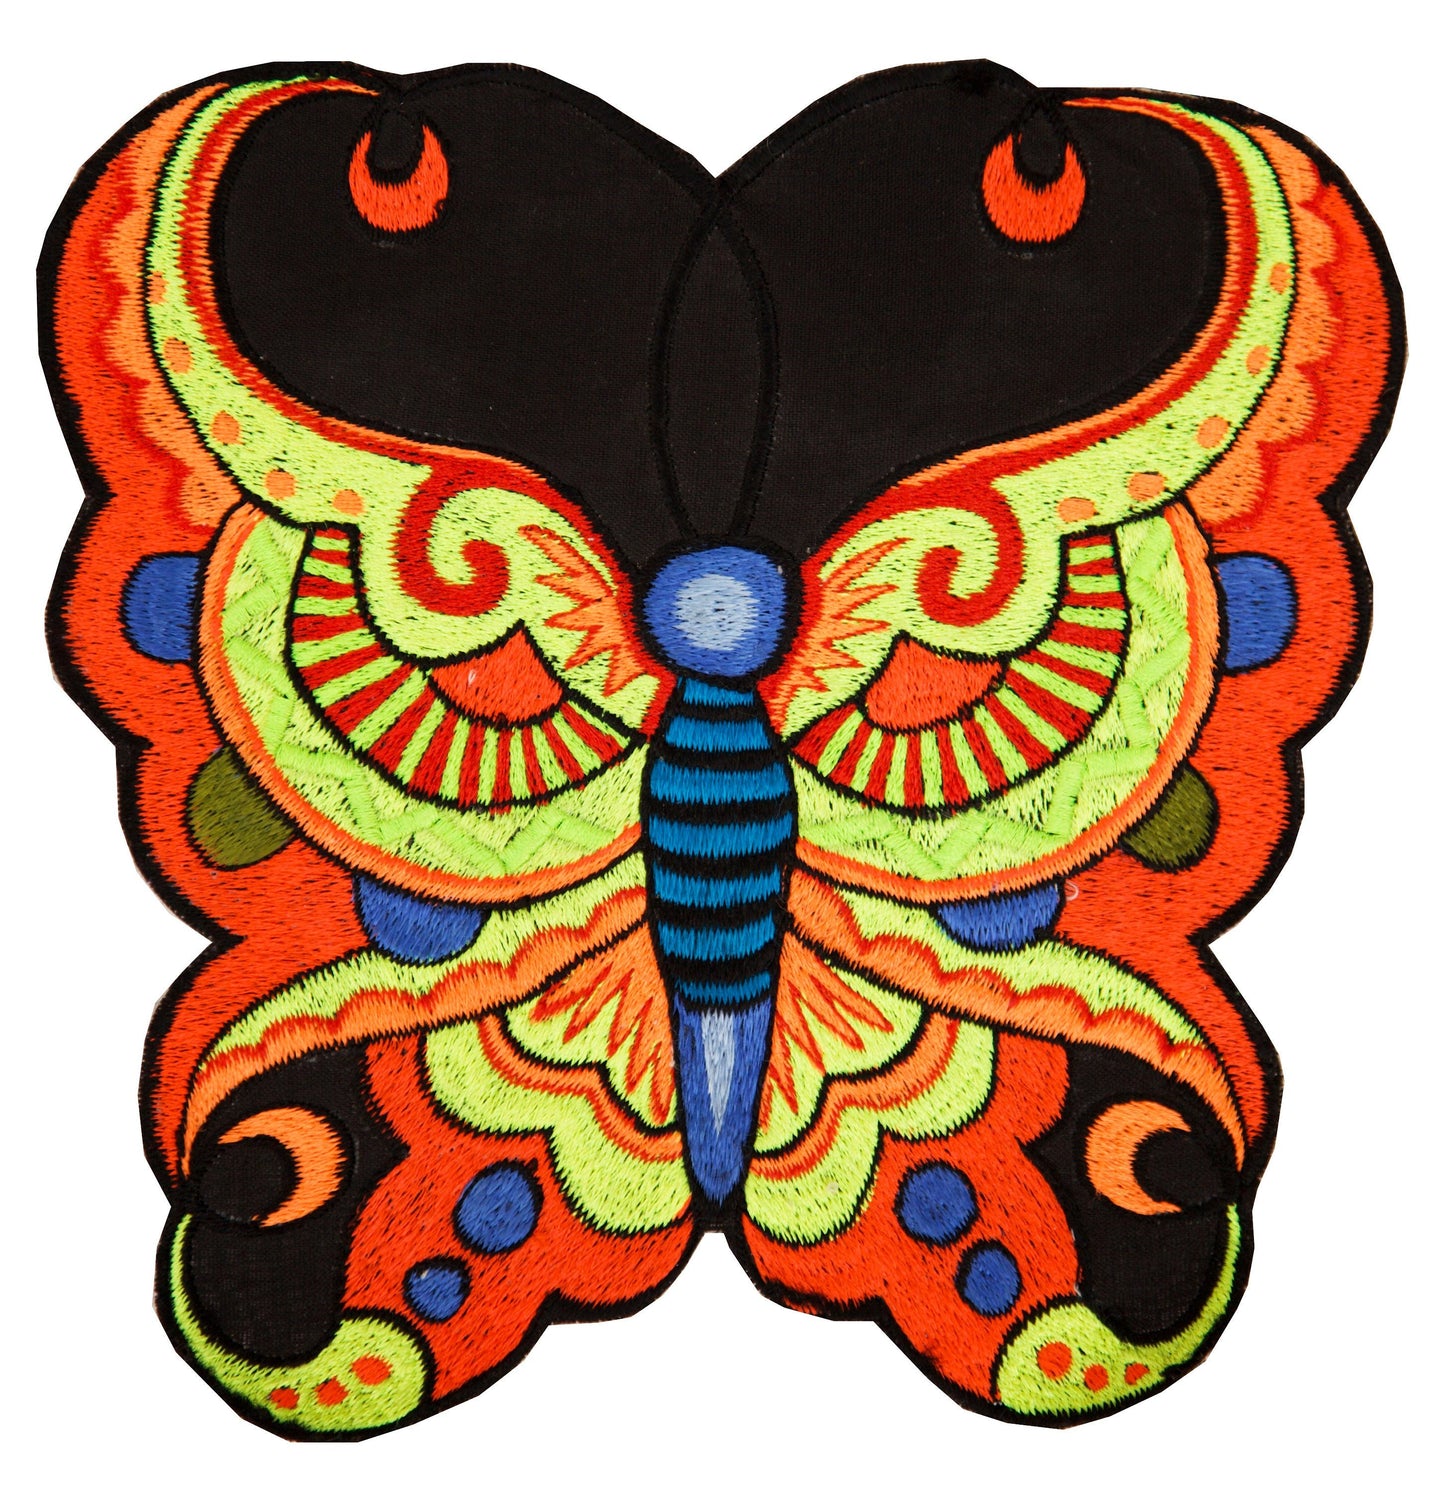 Psychedelic sunshine butterfly patch big size blacklight active embroidery psy circus art